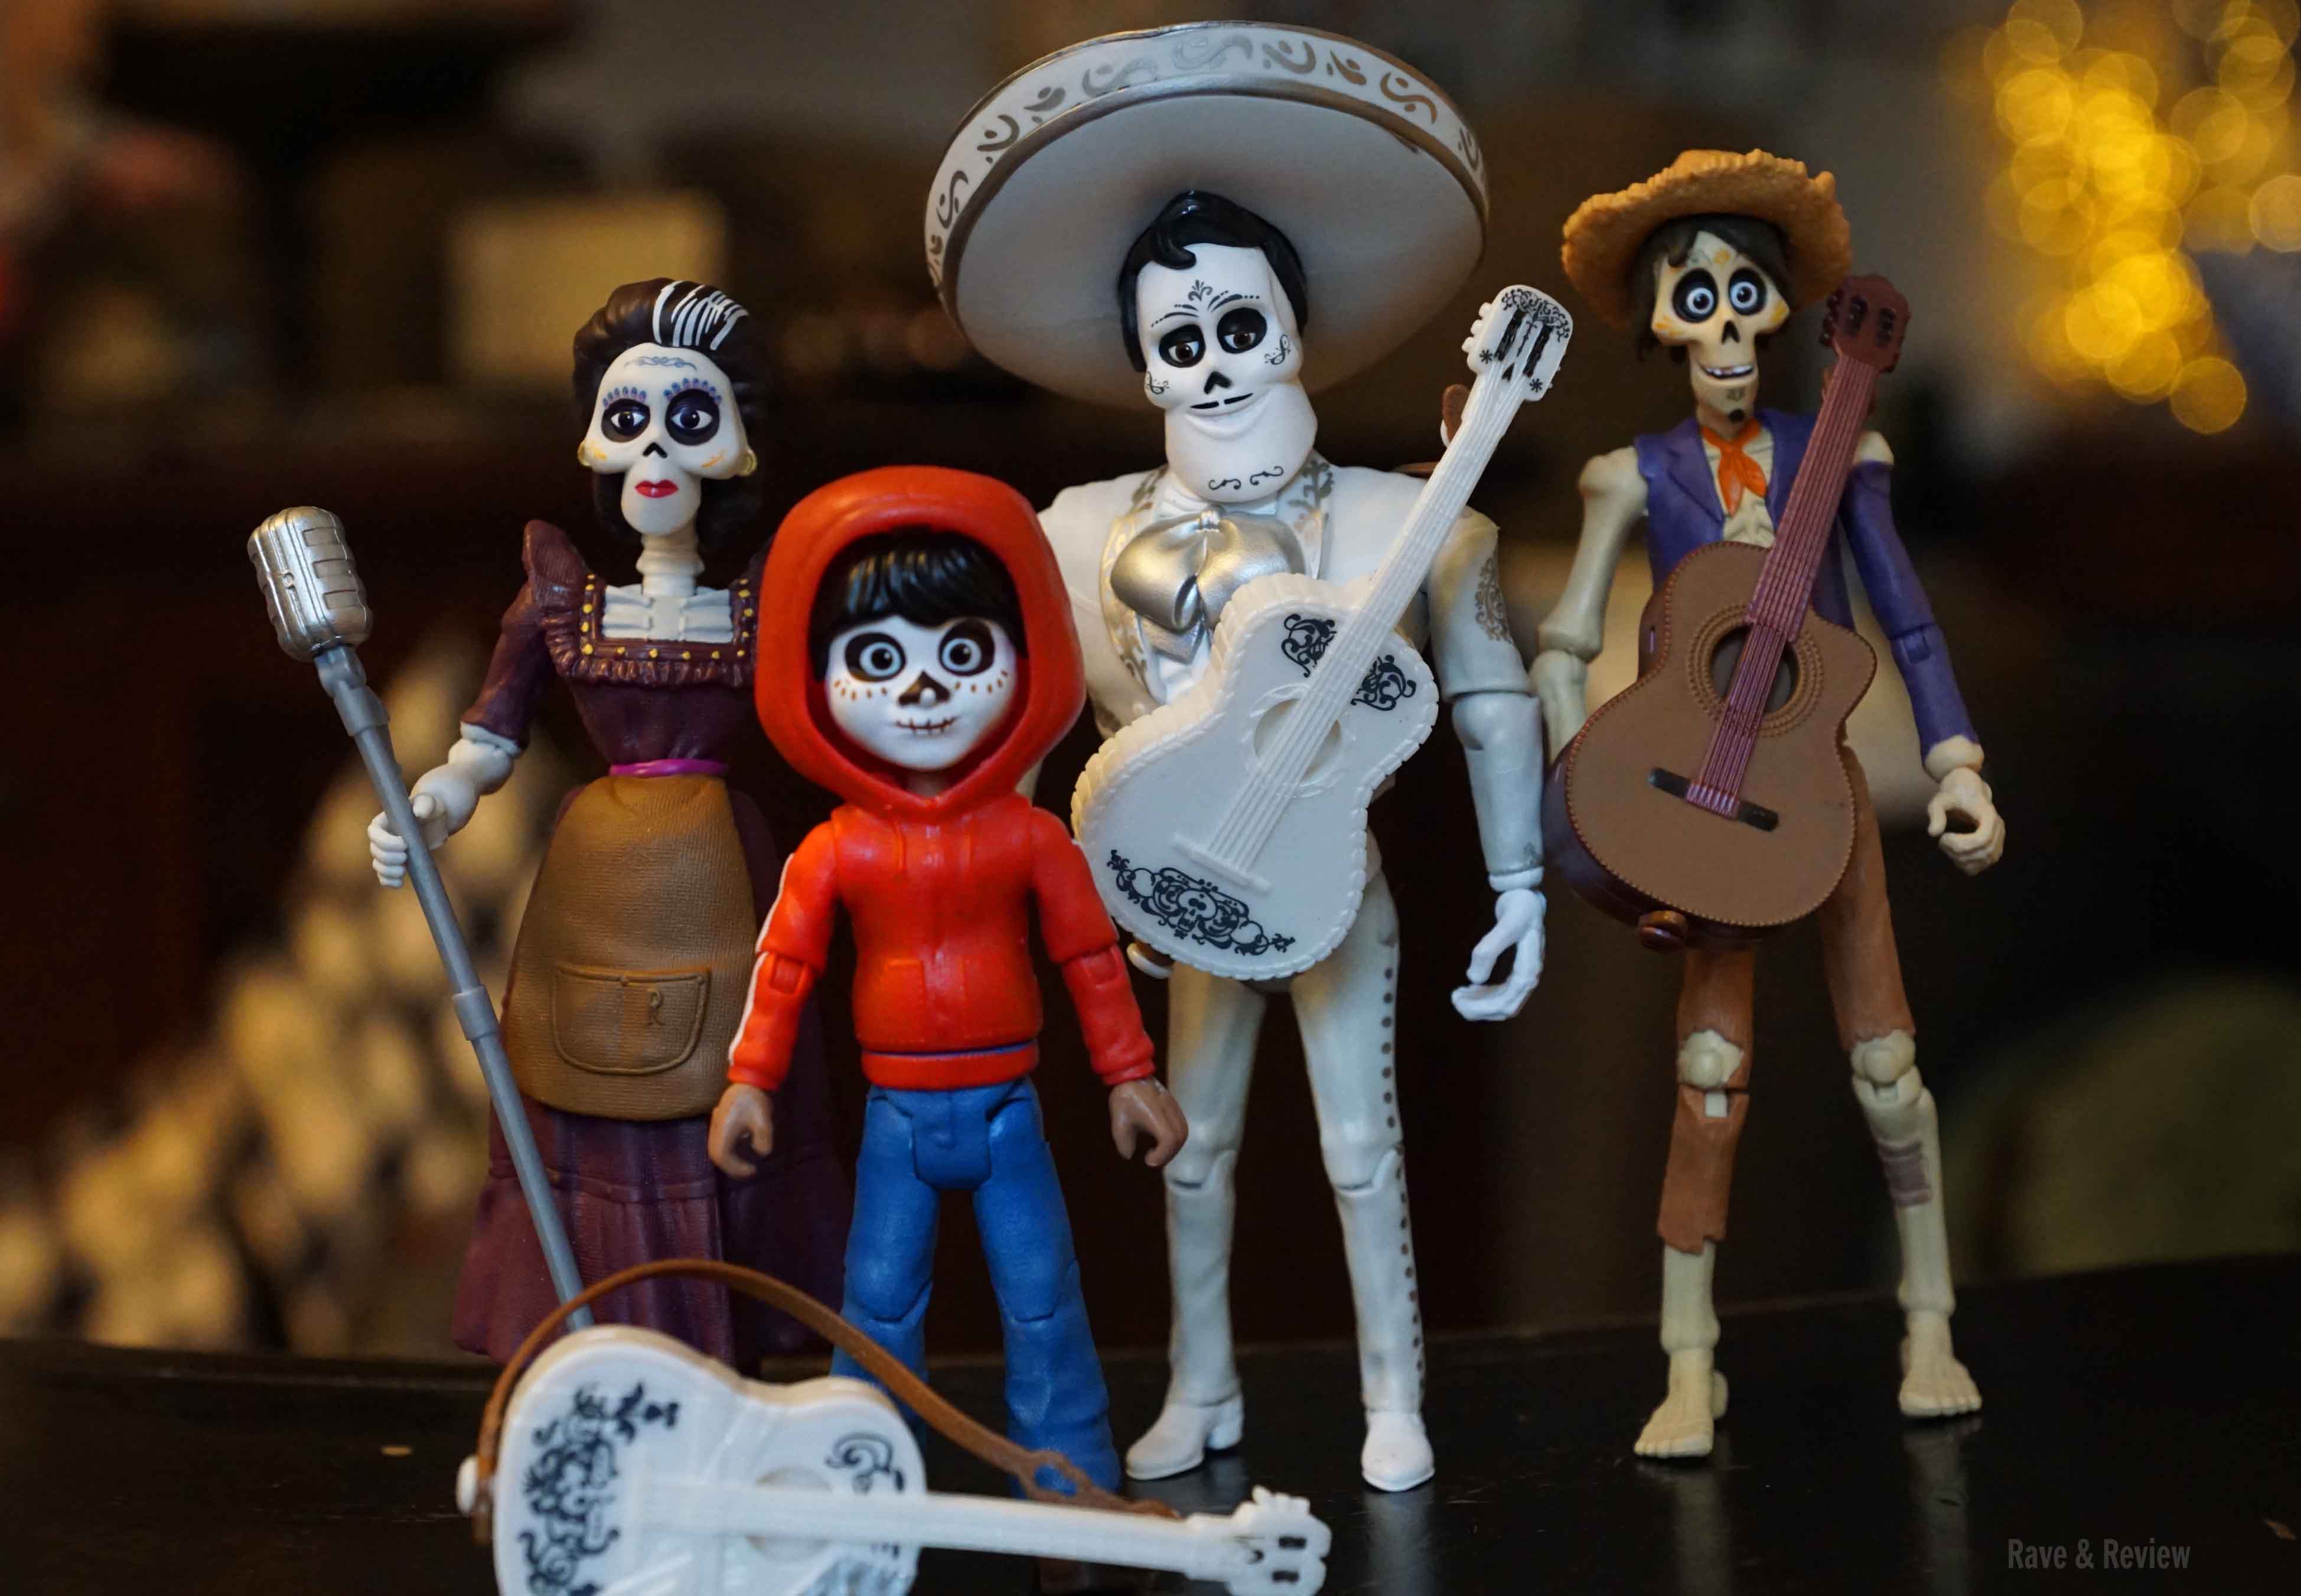 What You Need to Know About Disney and Pixar's Coco